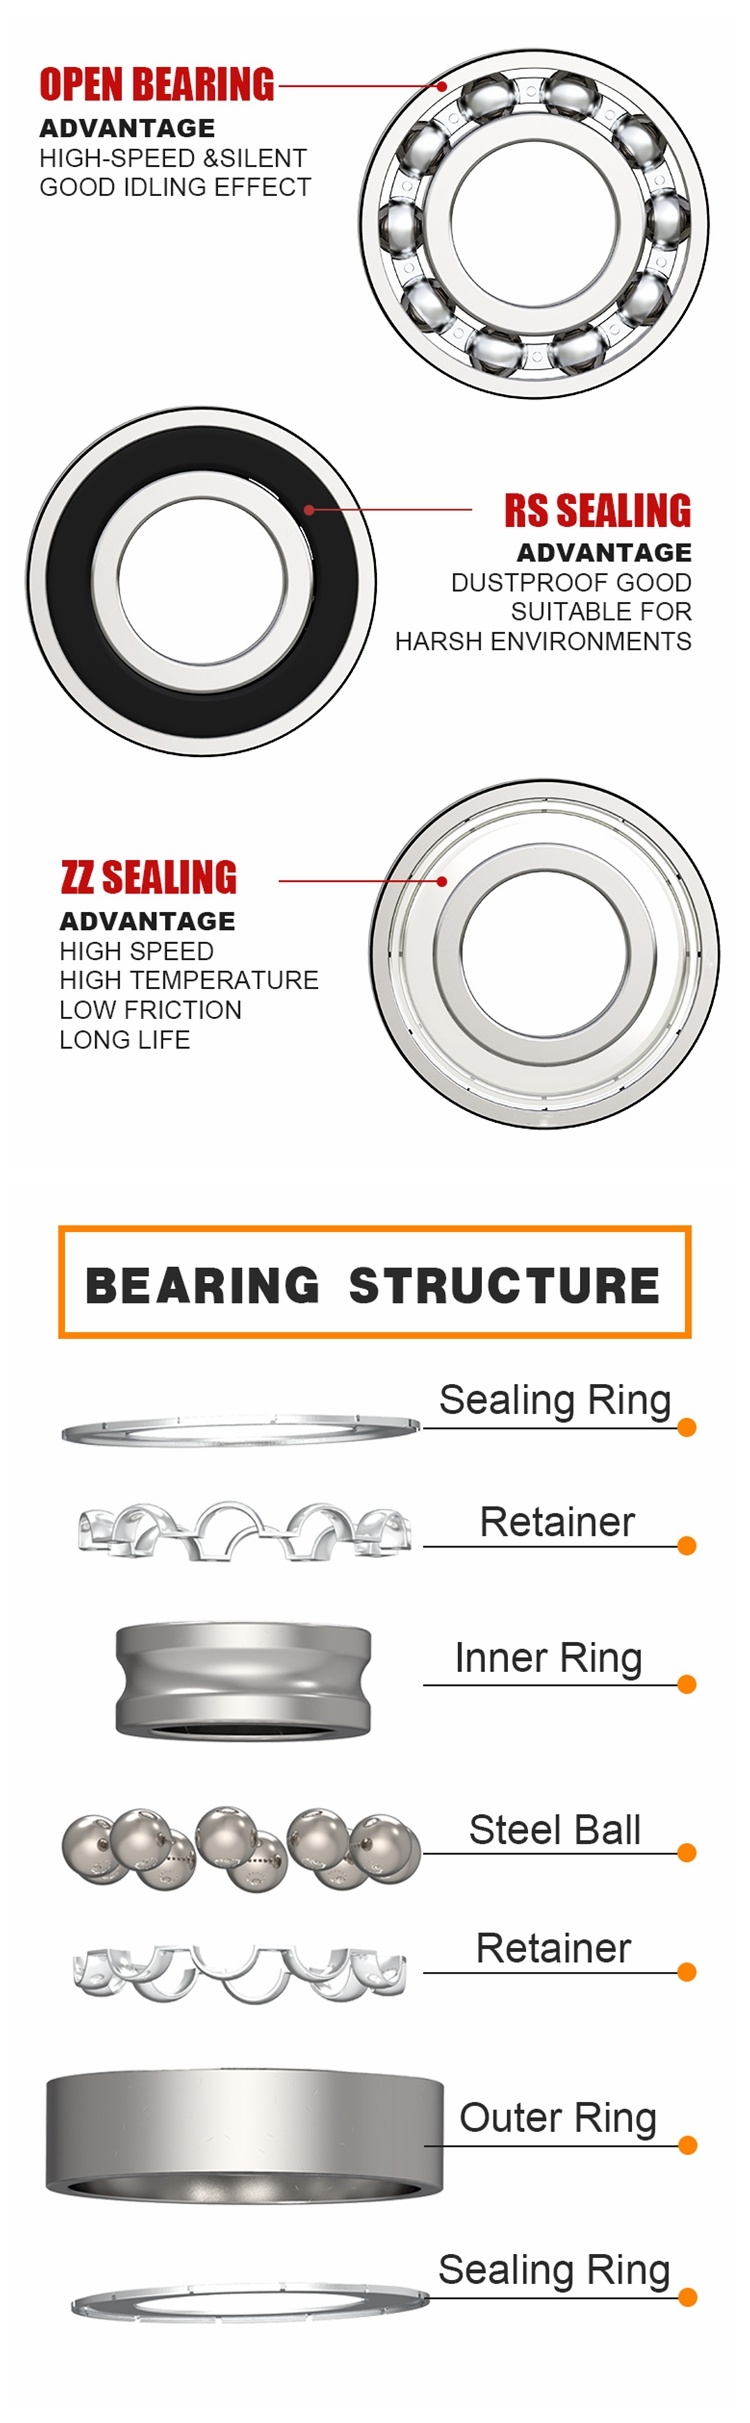 Low Noise Wheelchair Bearing Z2 V2 6919 RS Deep Groove Ball Bearings